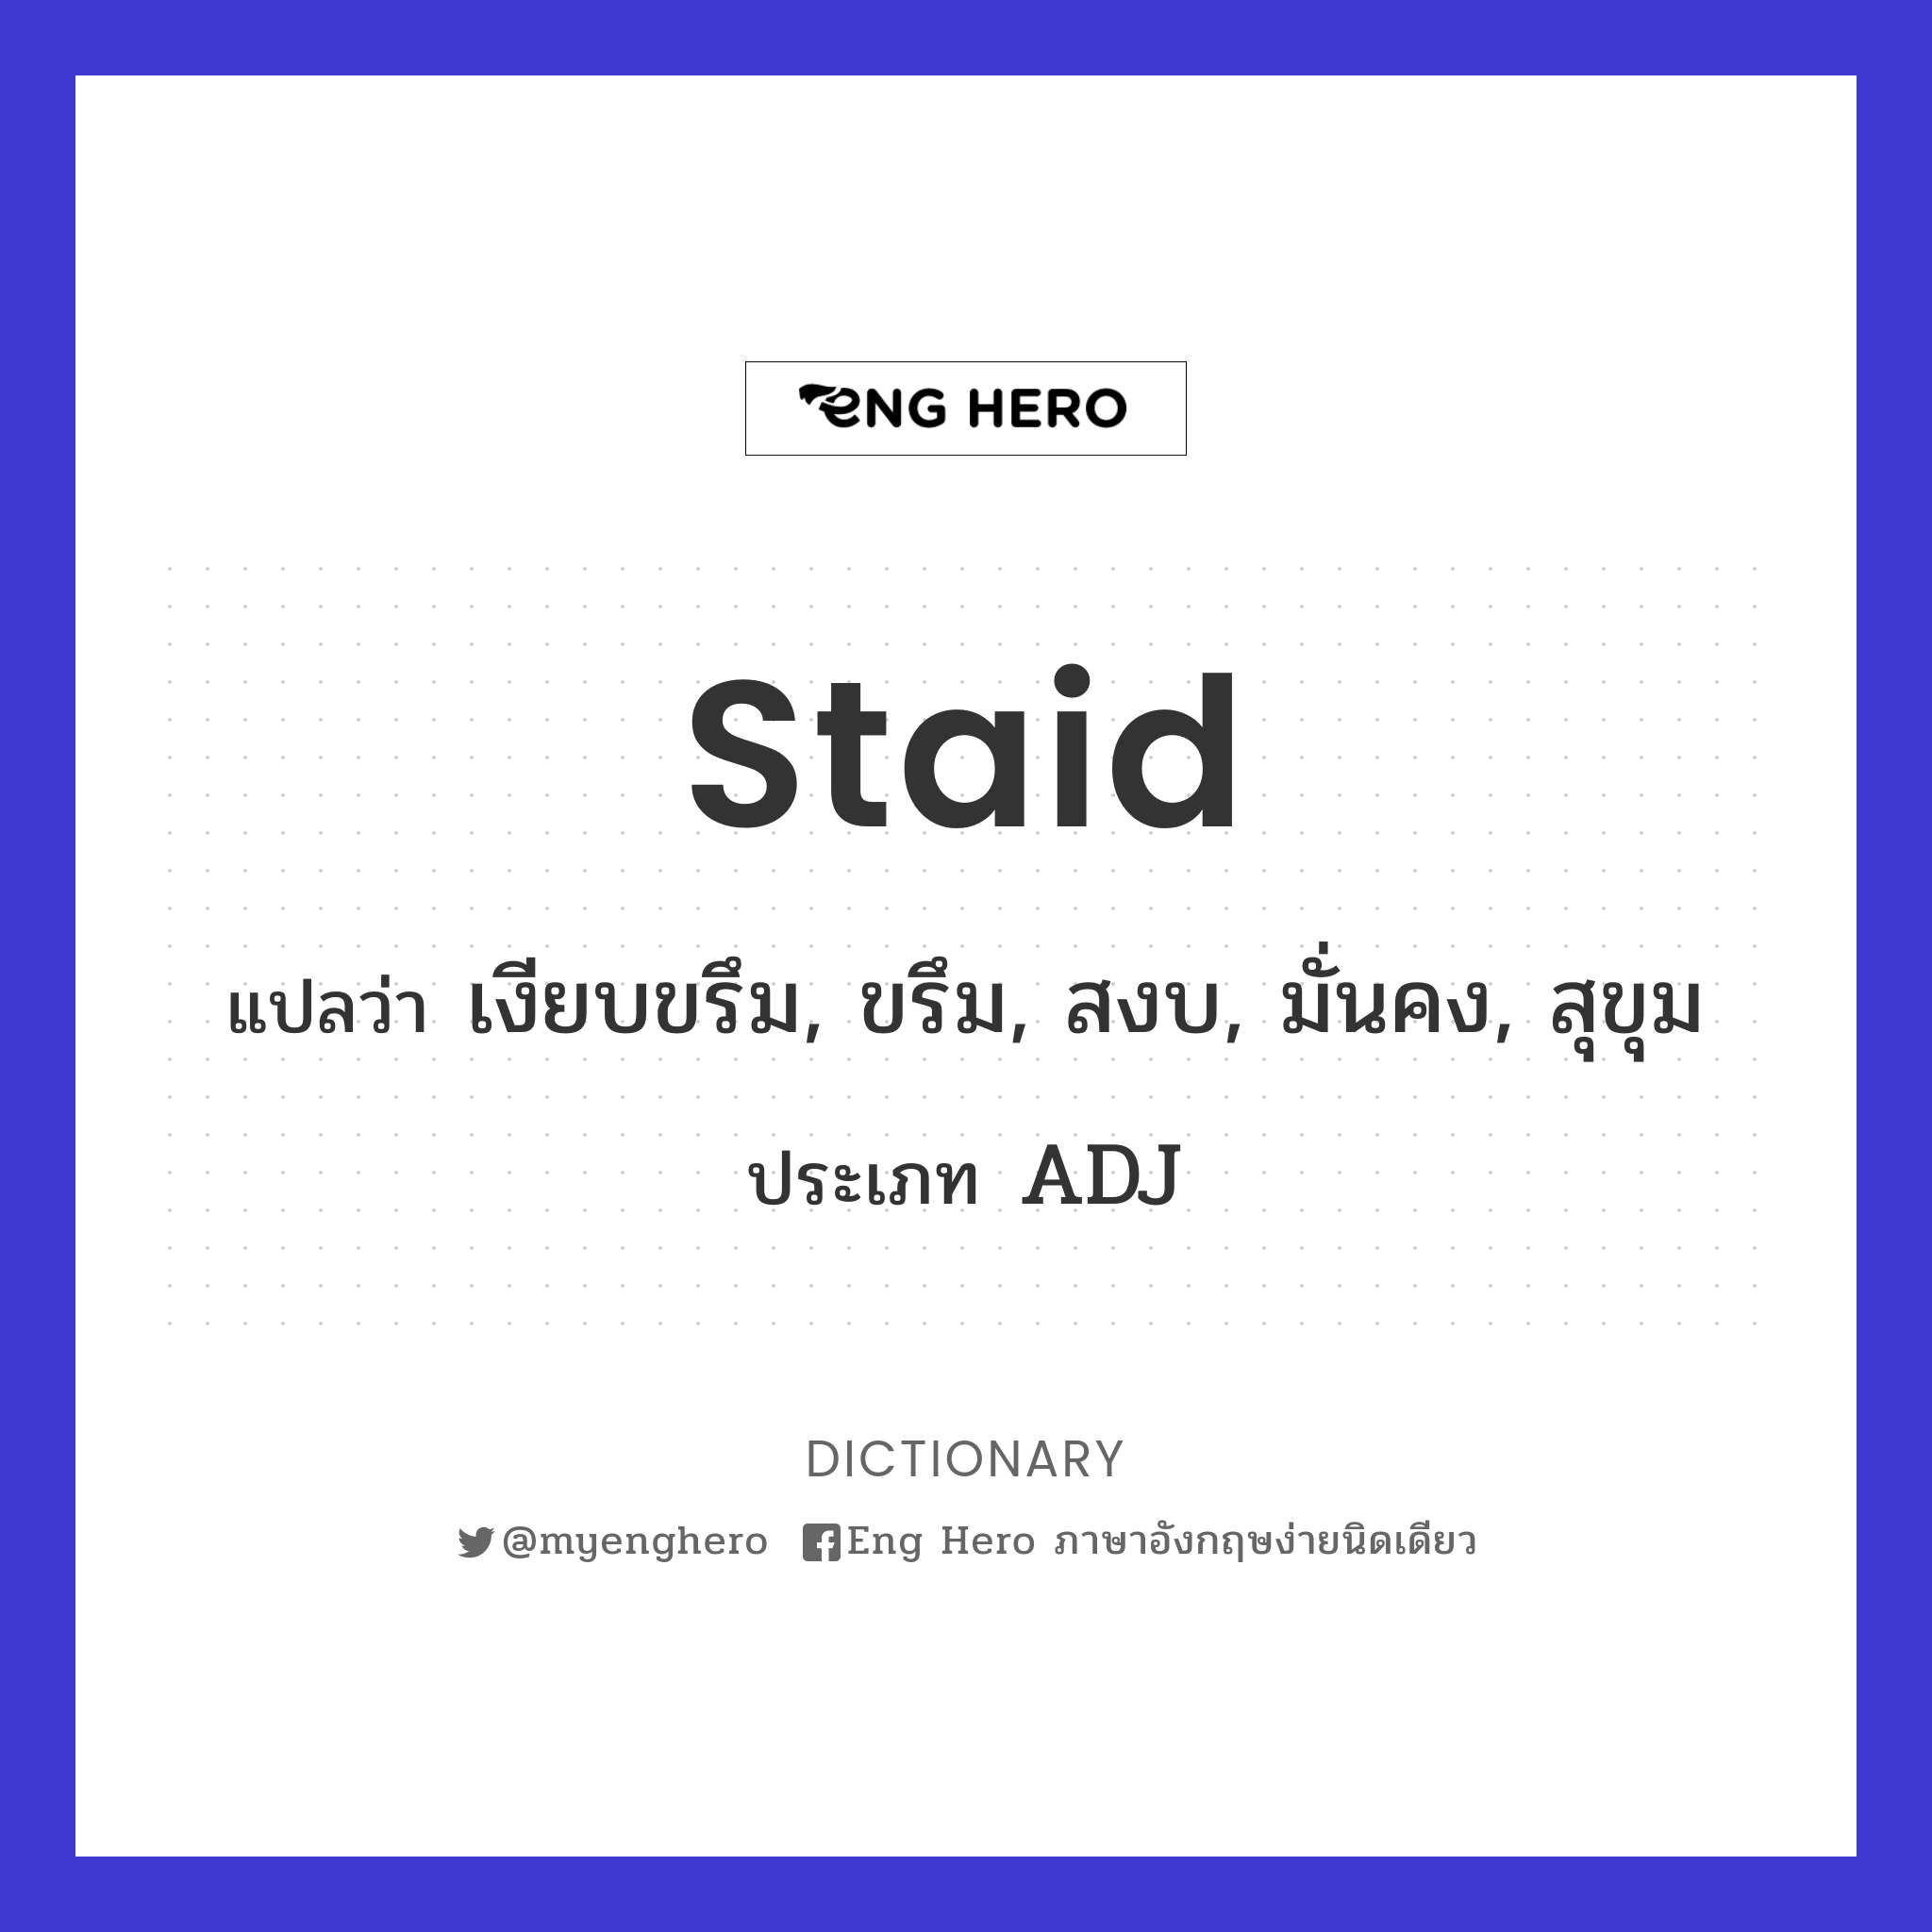 staid